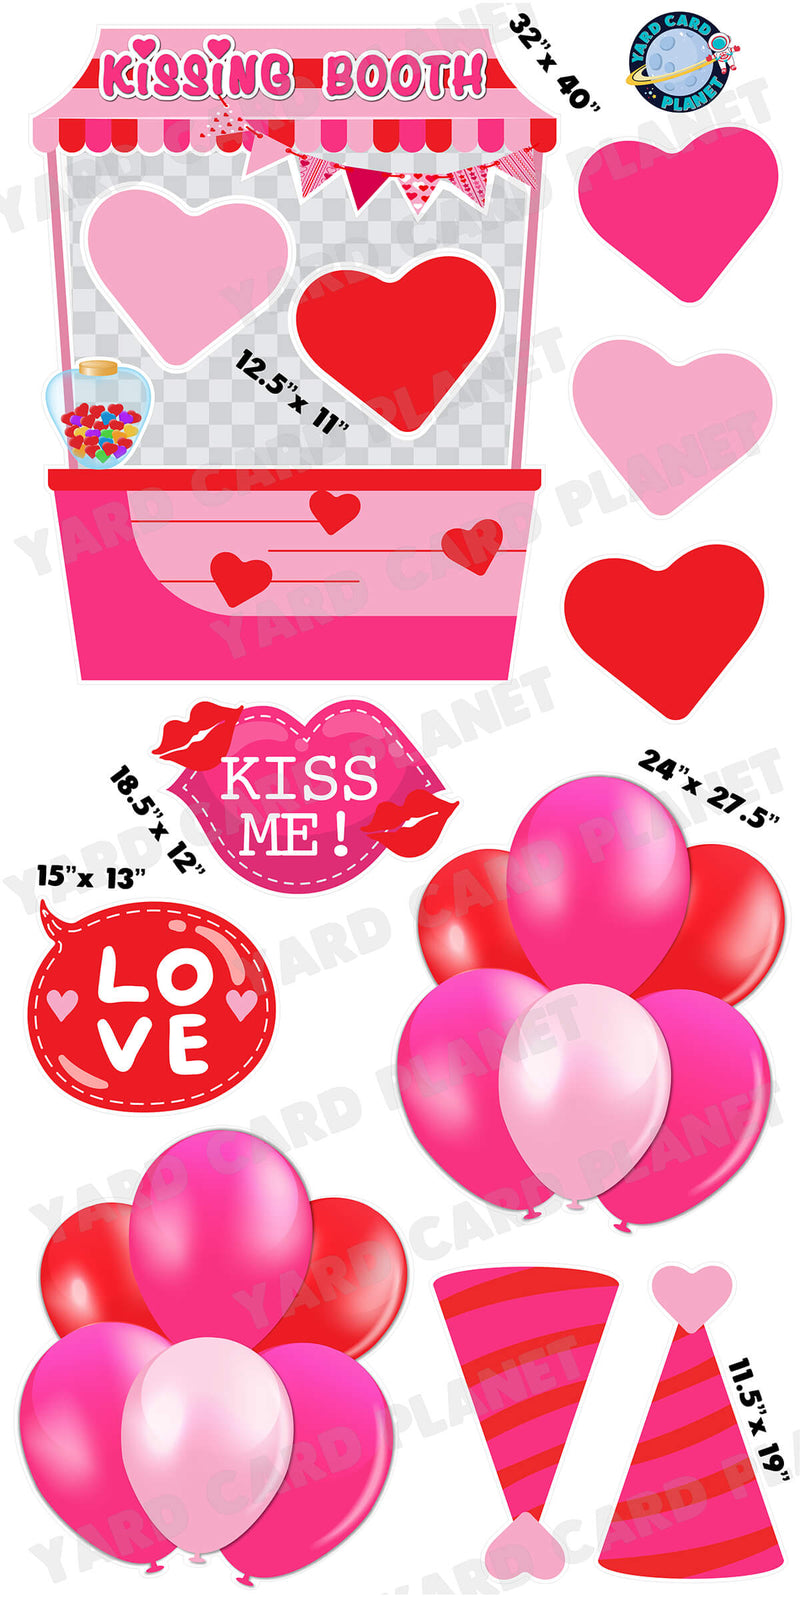 Valentine's Day Love Kissing Booth and Yard Card Flair Set with Measurements